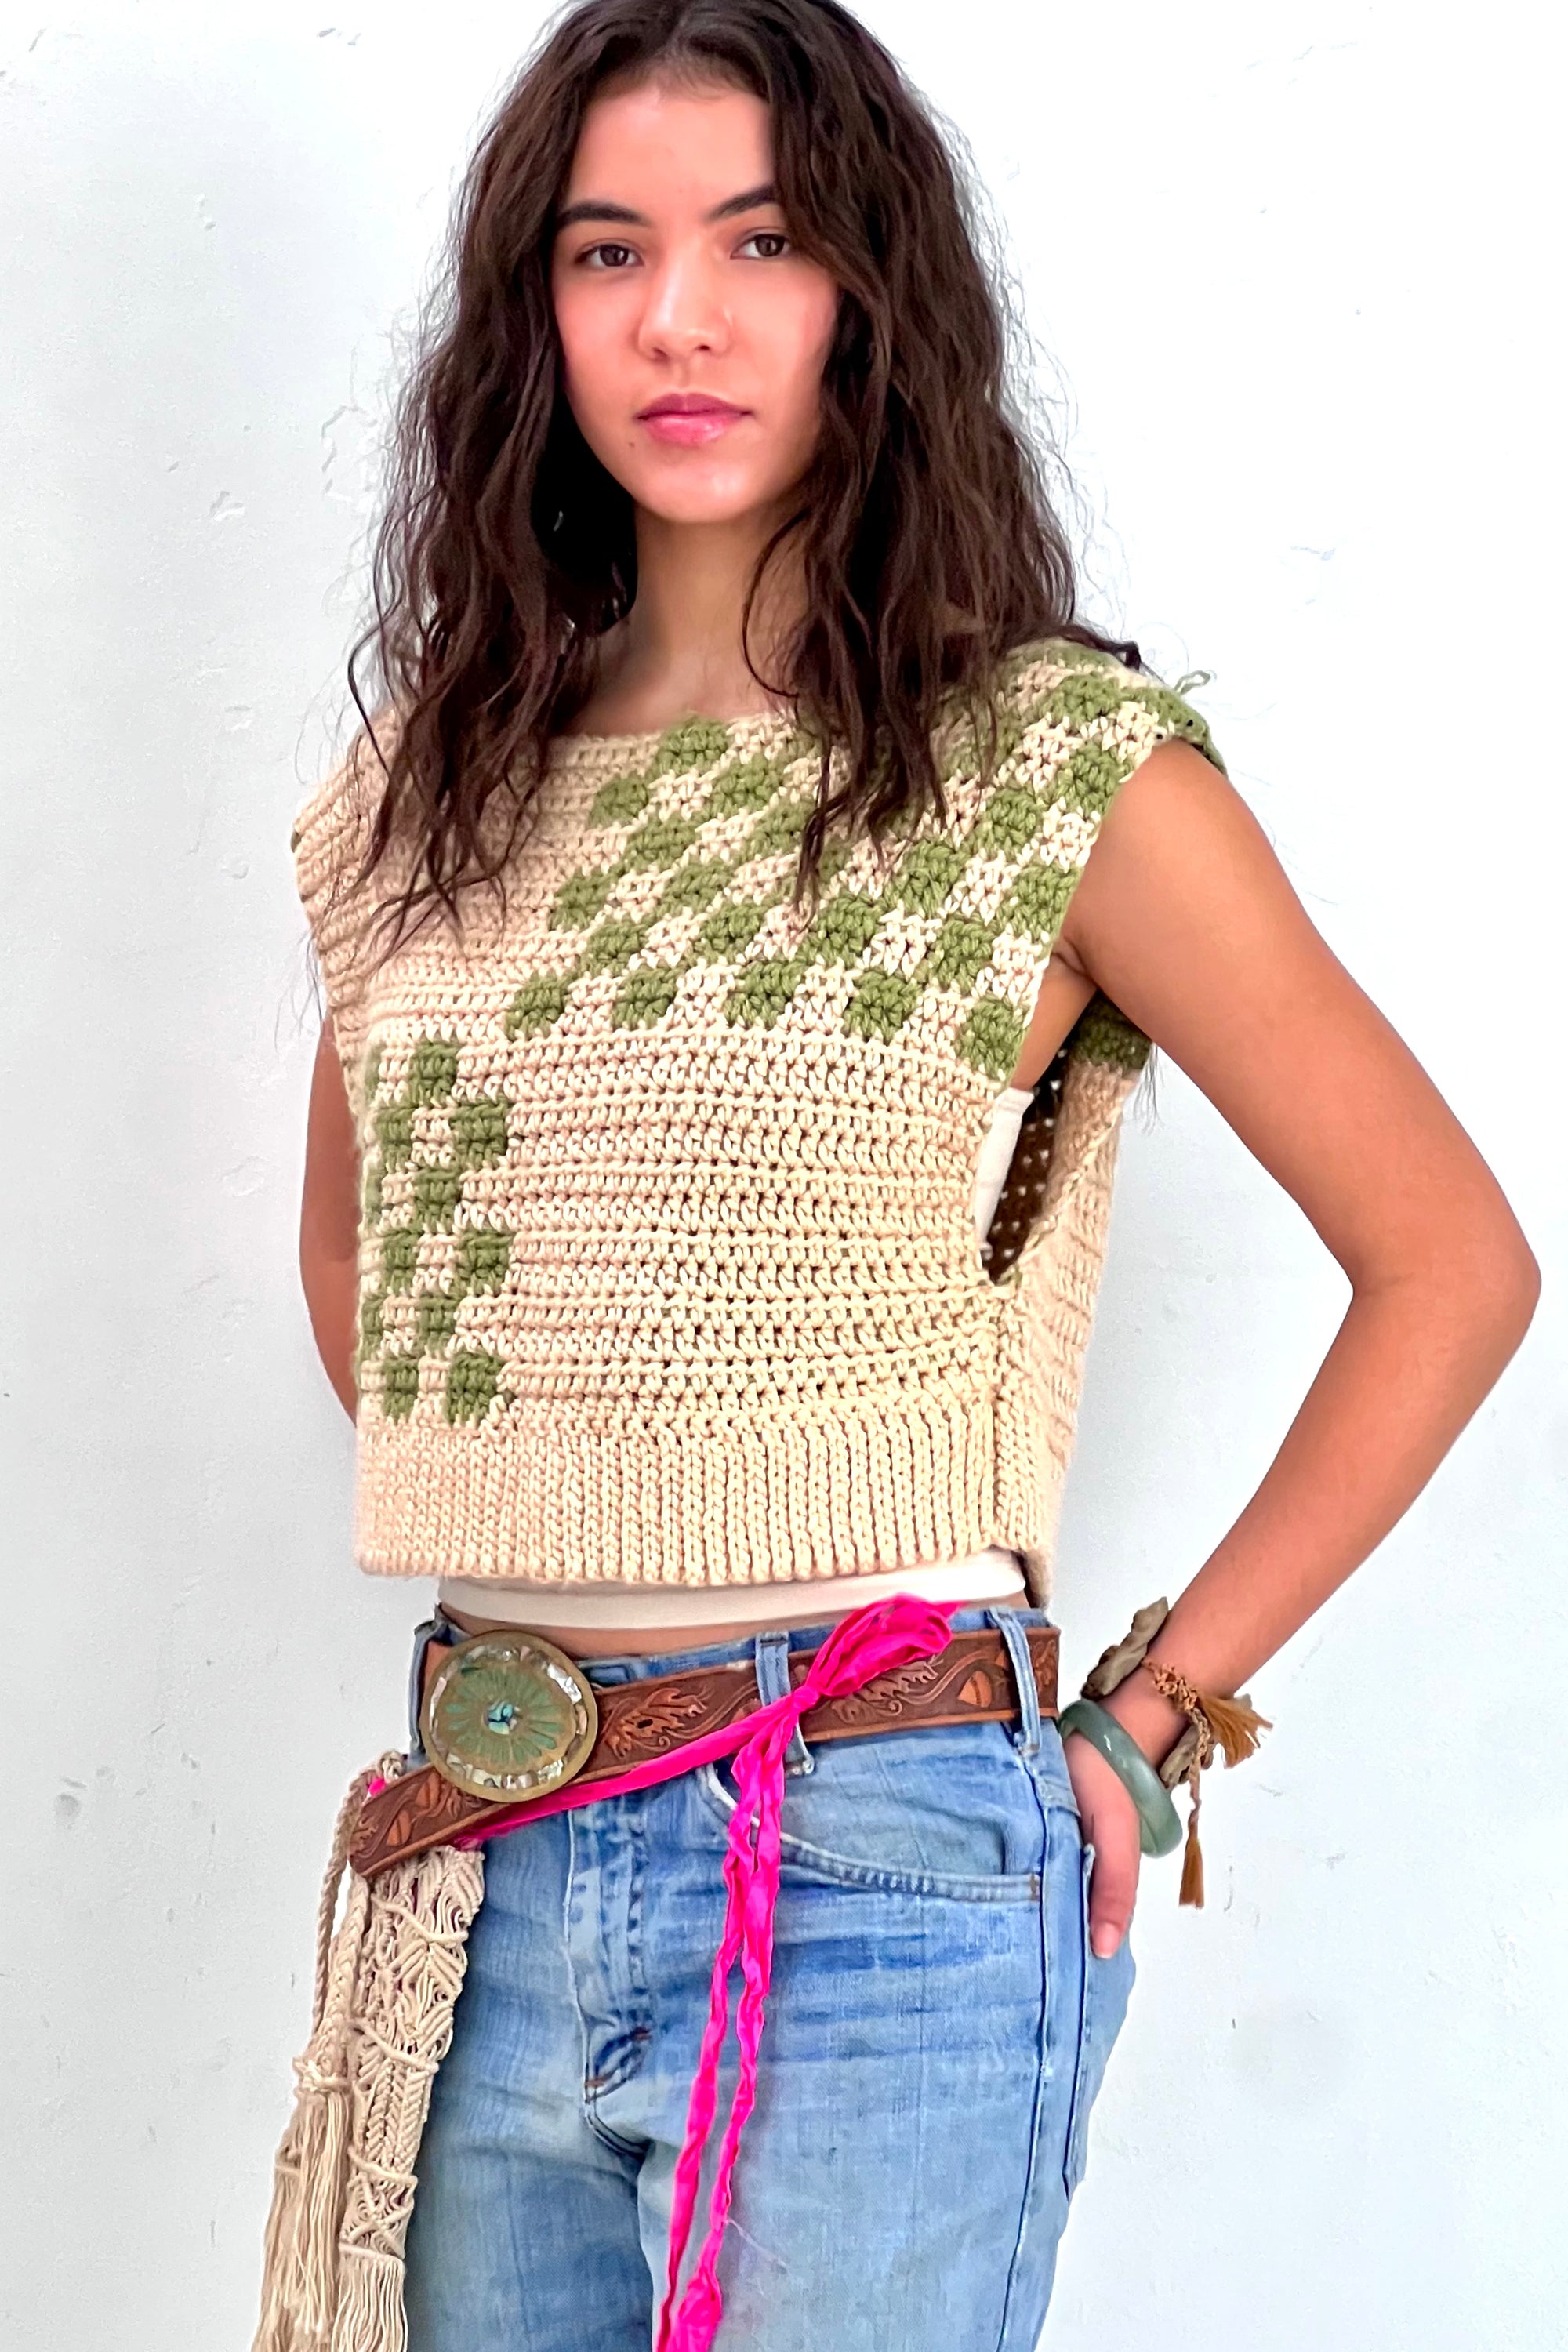 Vintage Hand Knit Sweater Vest Selected by Anna Corinna